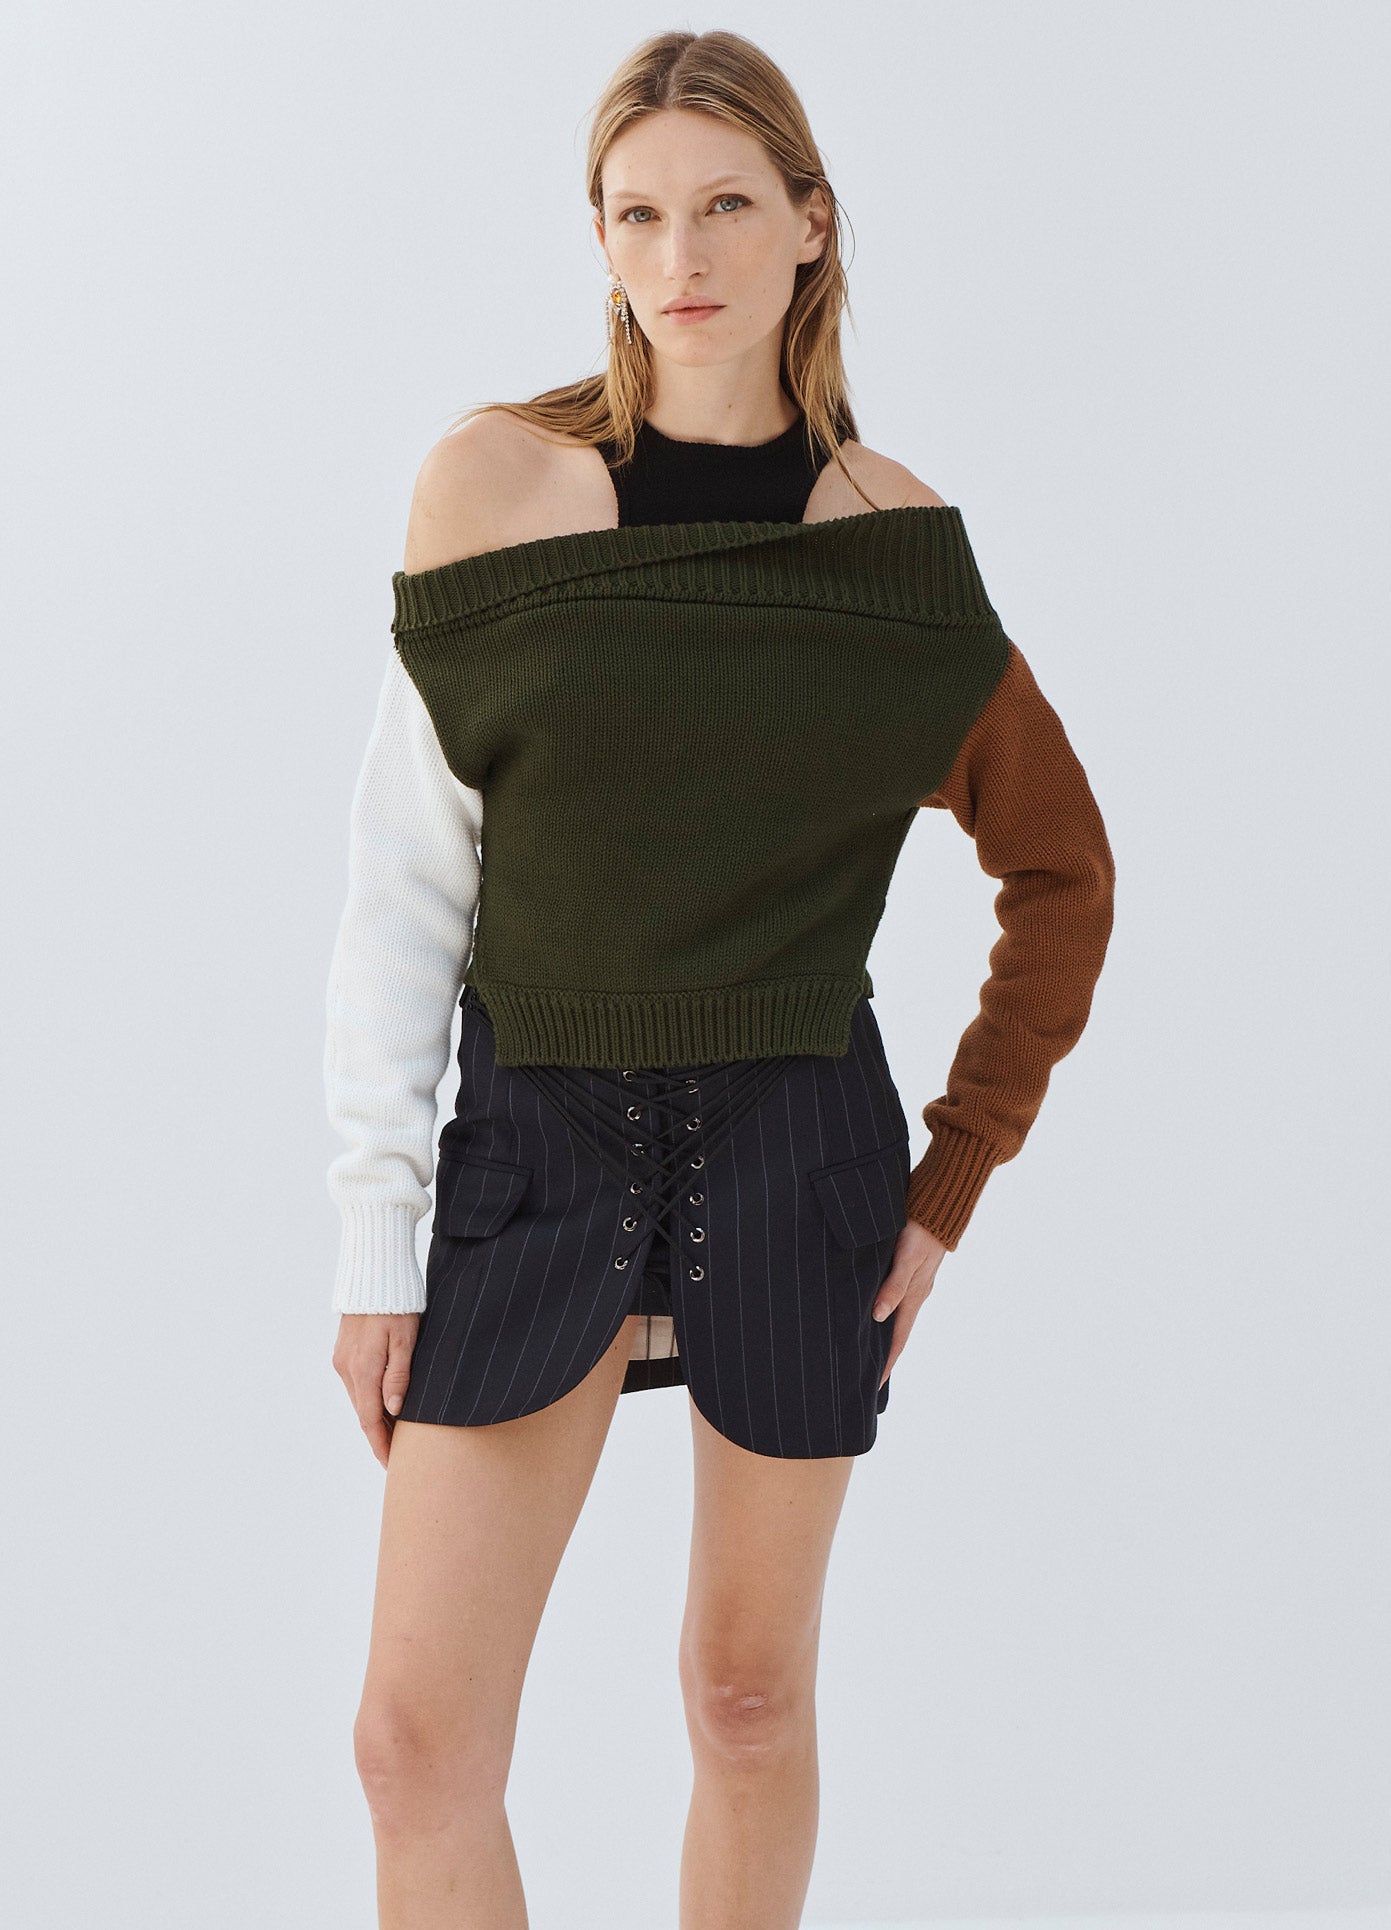 MONSE Color Blocked Off Shoulder Sweater in Olive on Model Front View